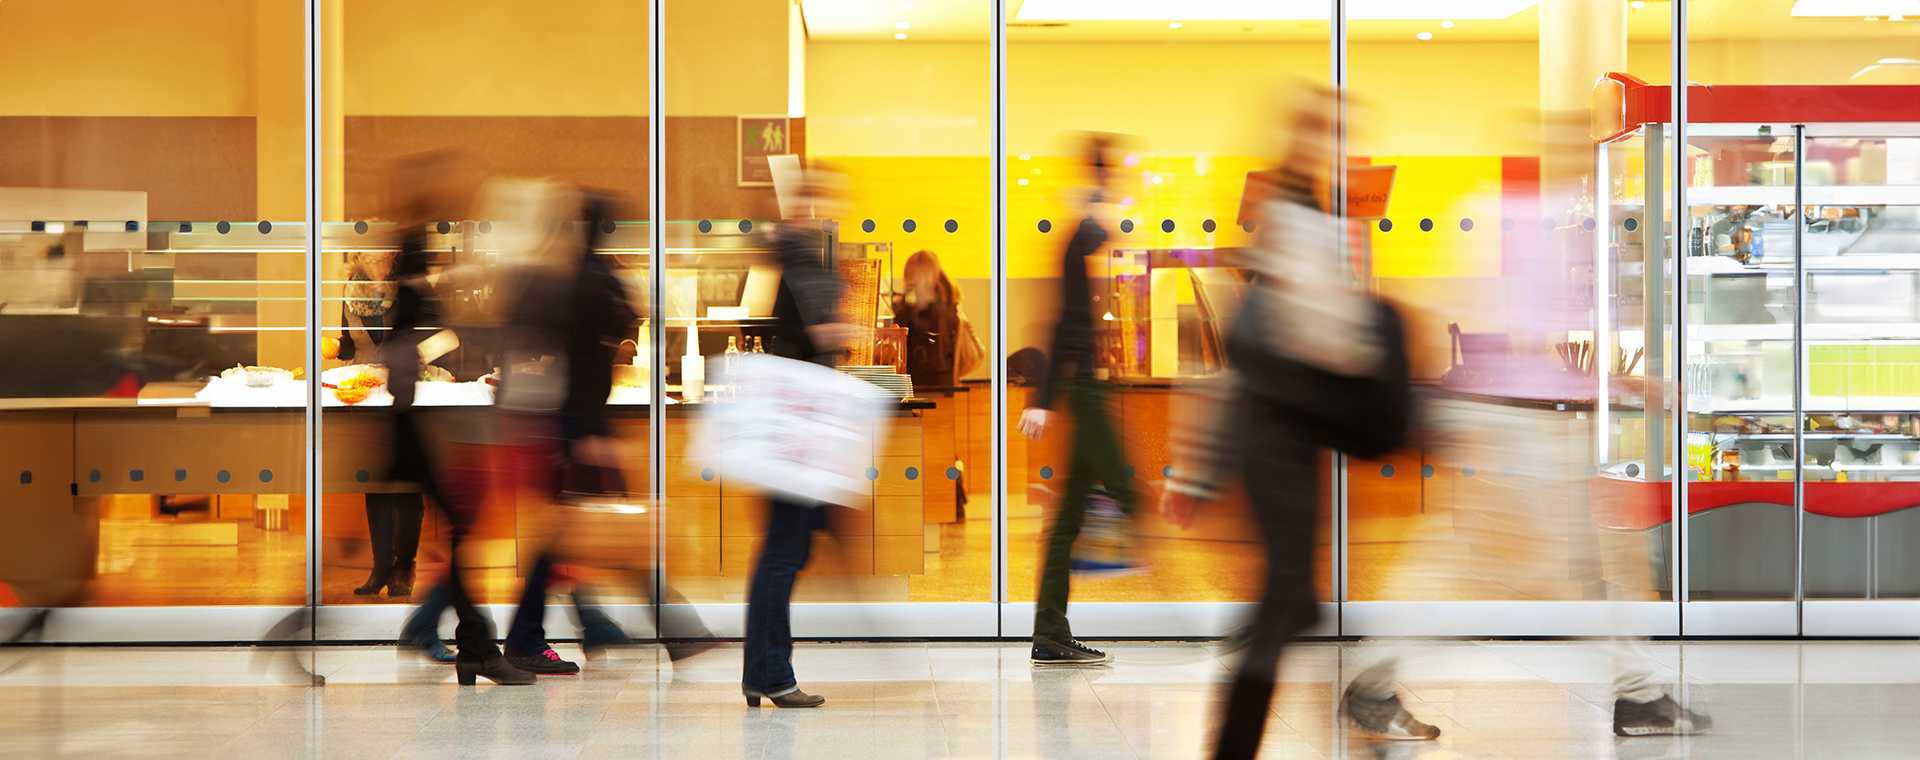 Abstract image of blurred shoppers walking